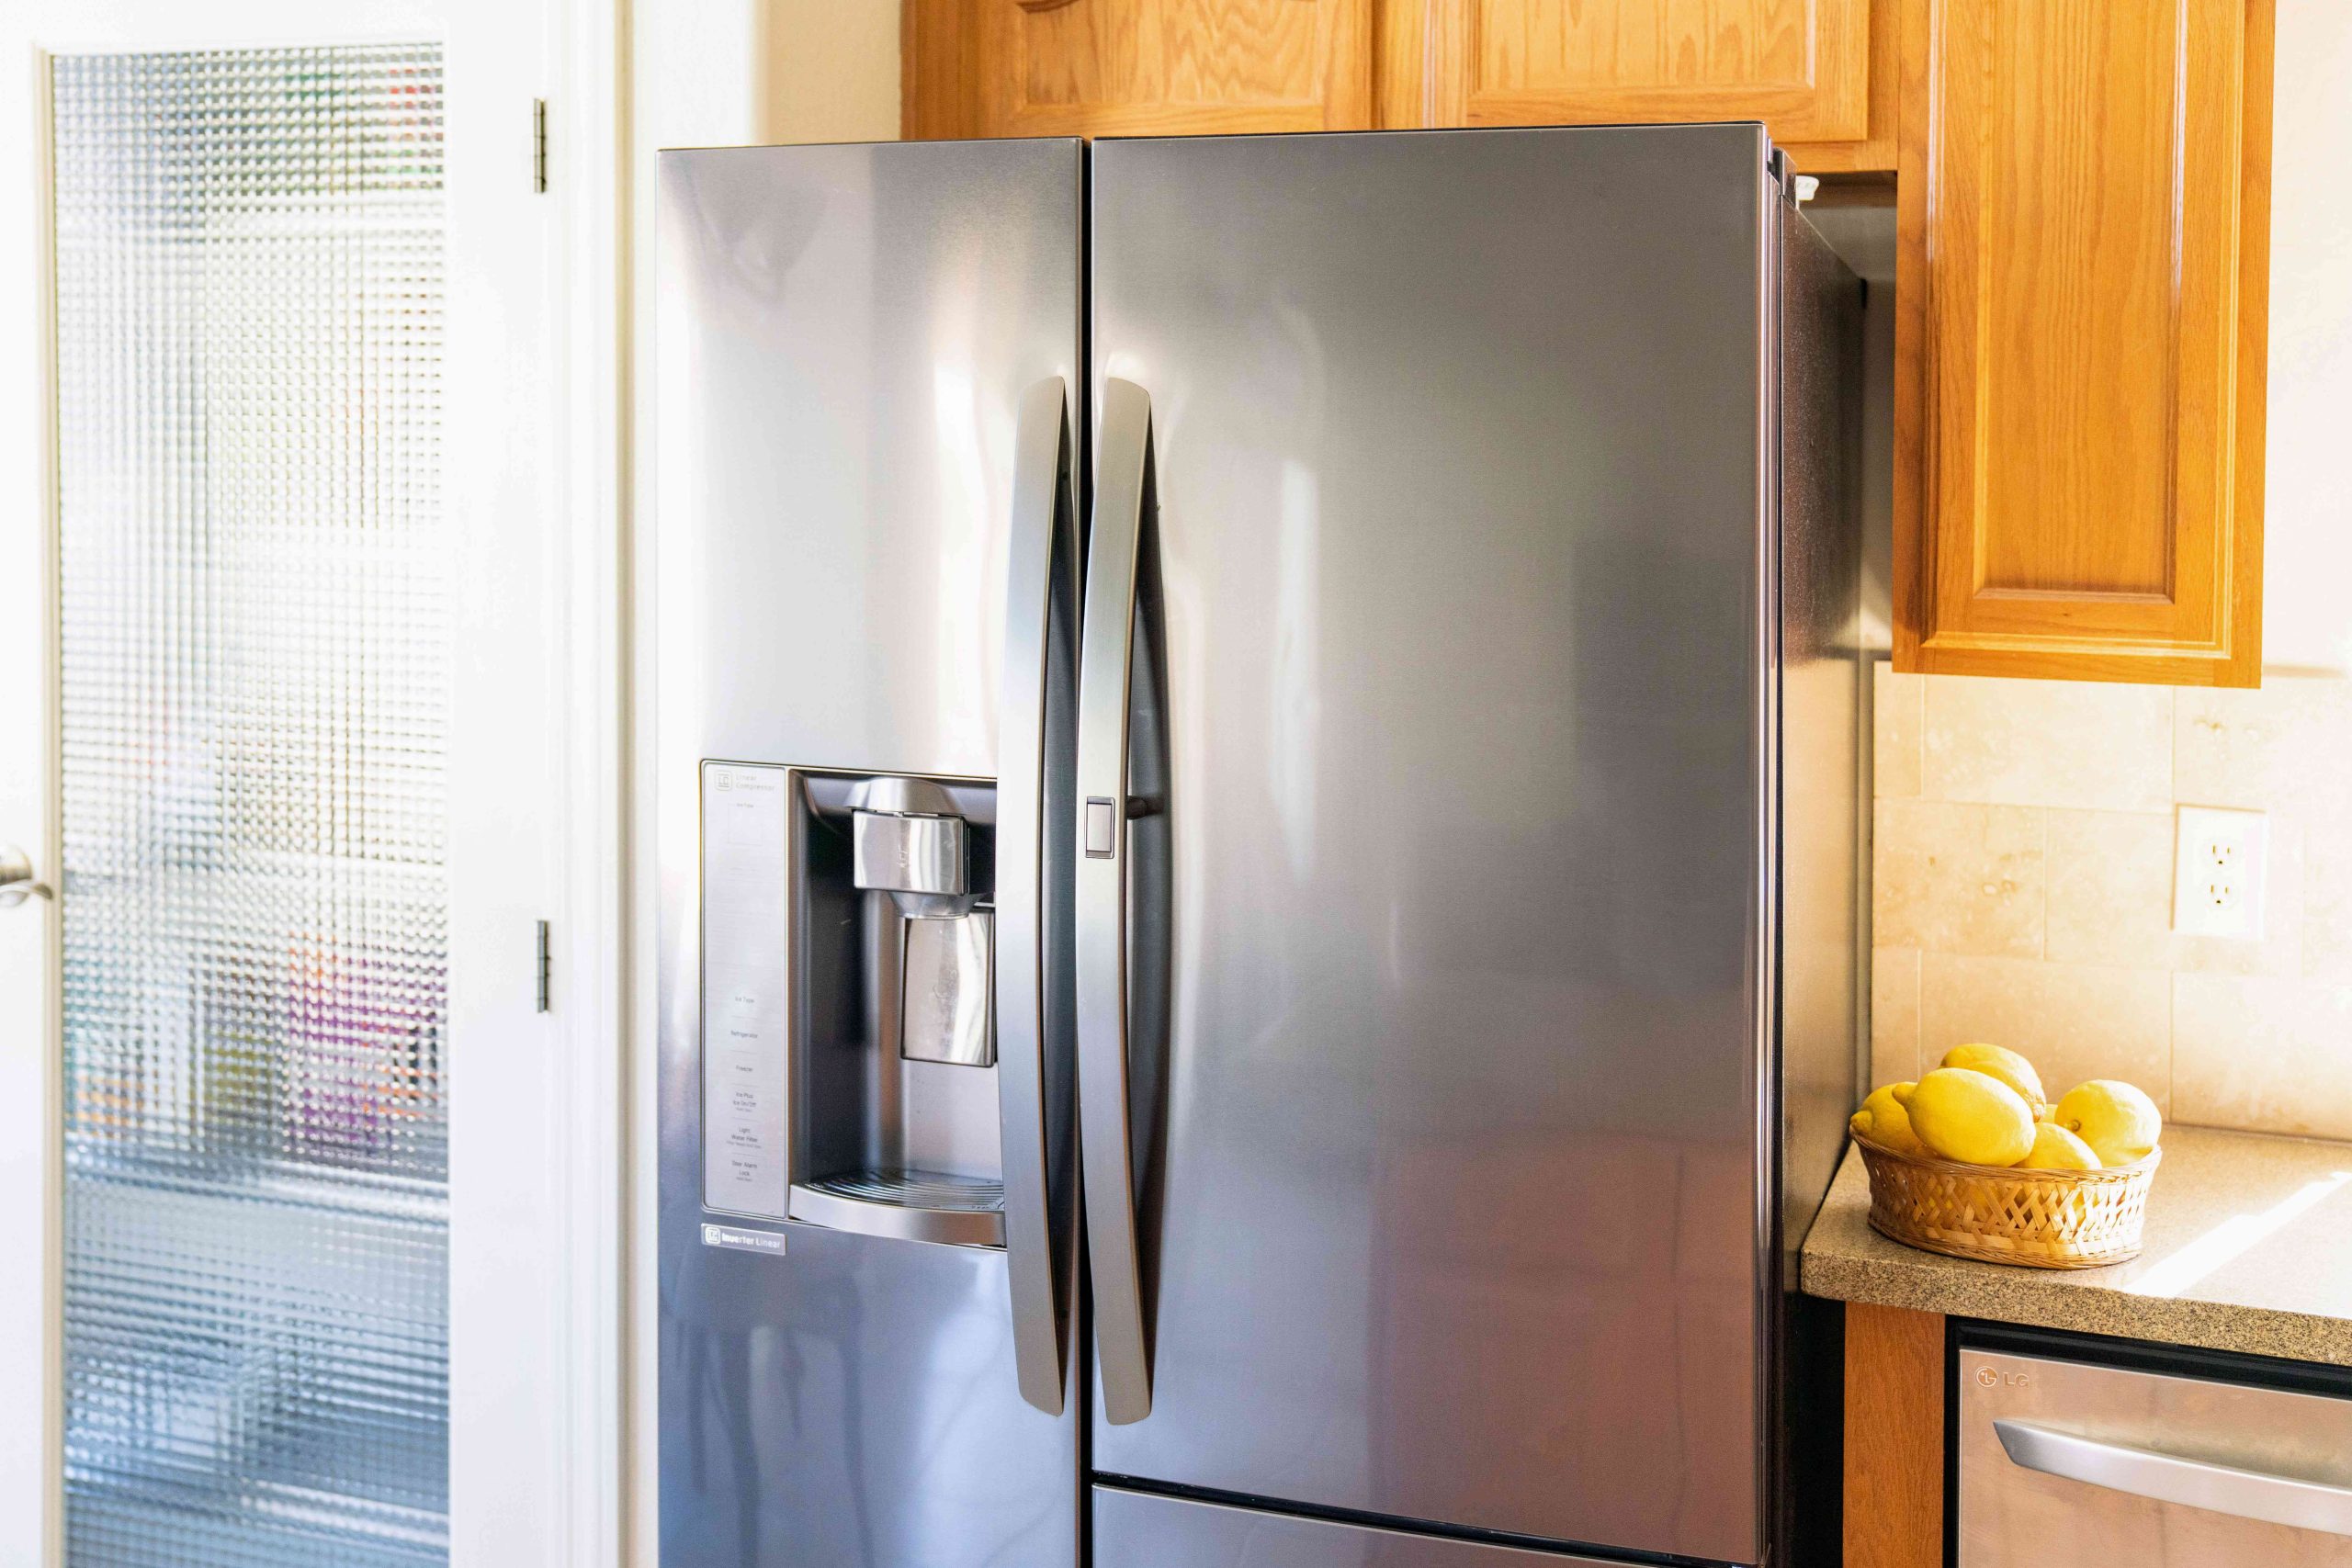 Overview of Refrigerator Cooling